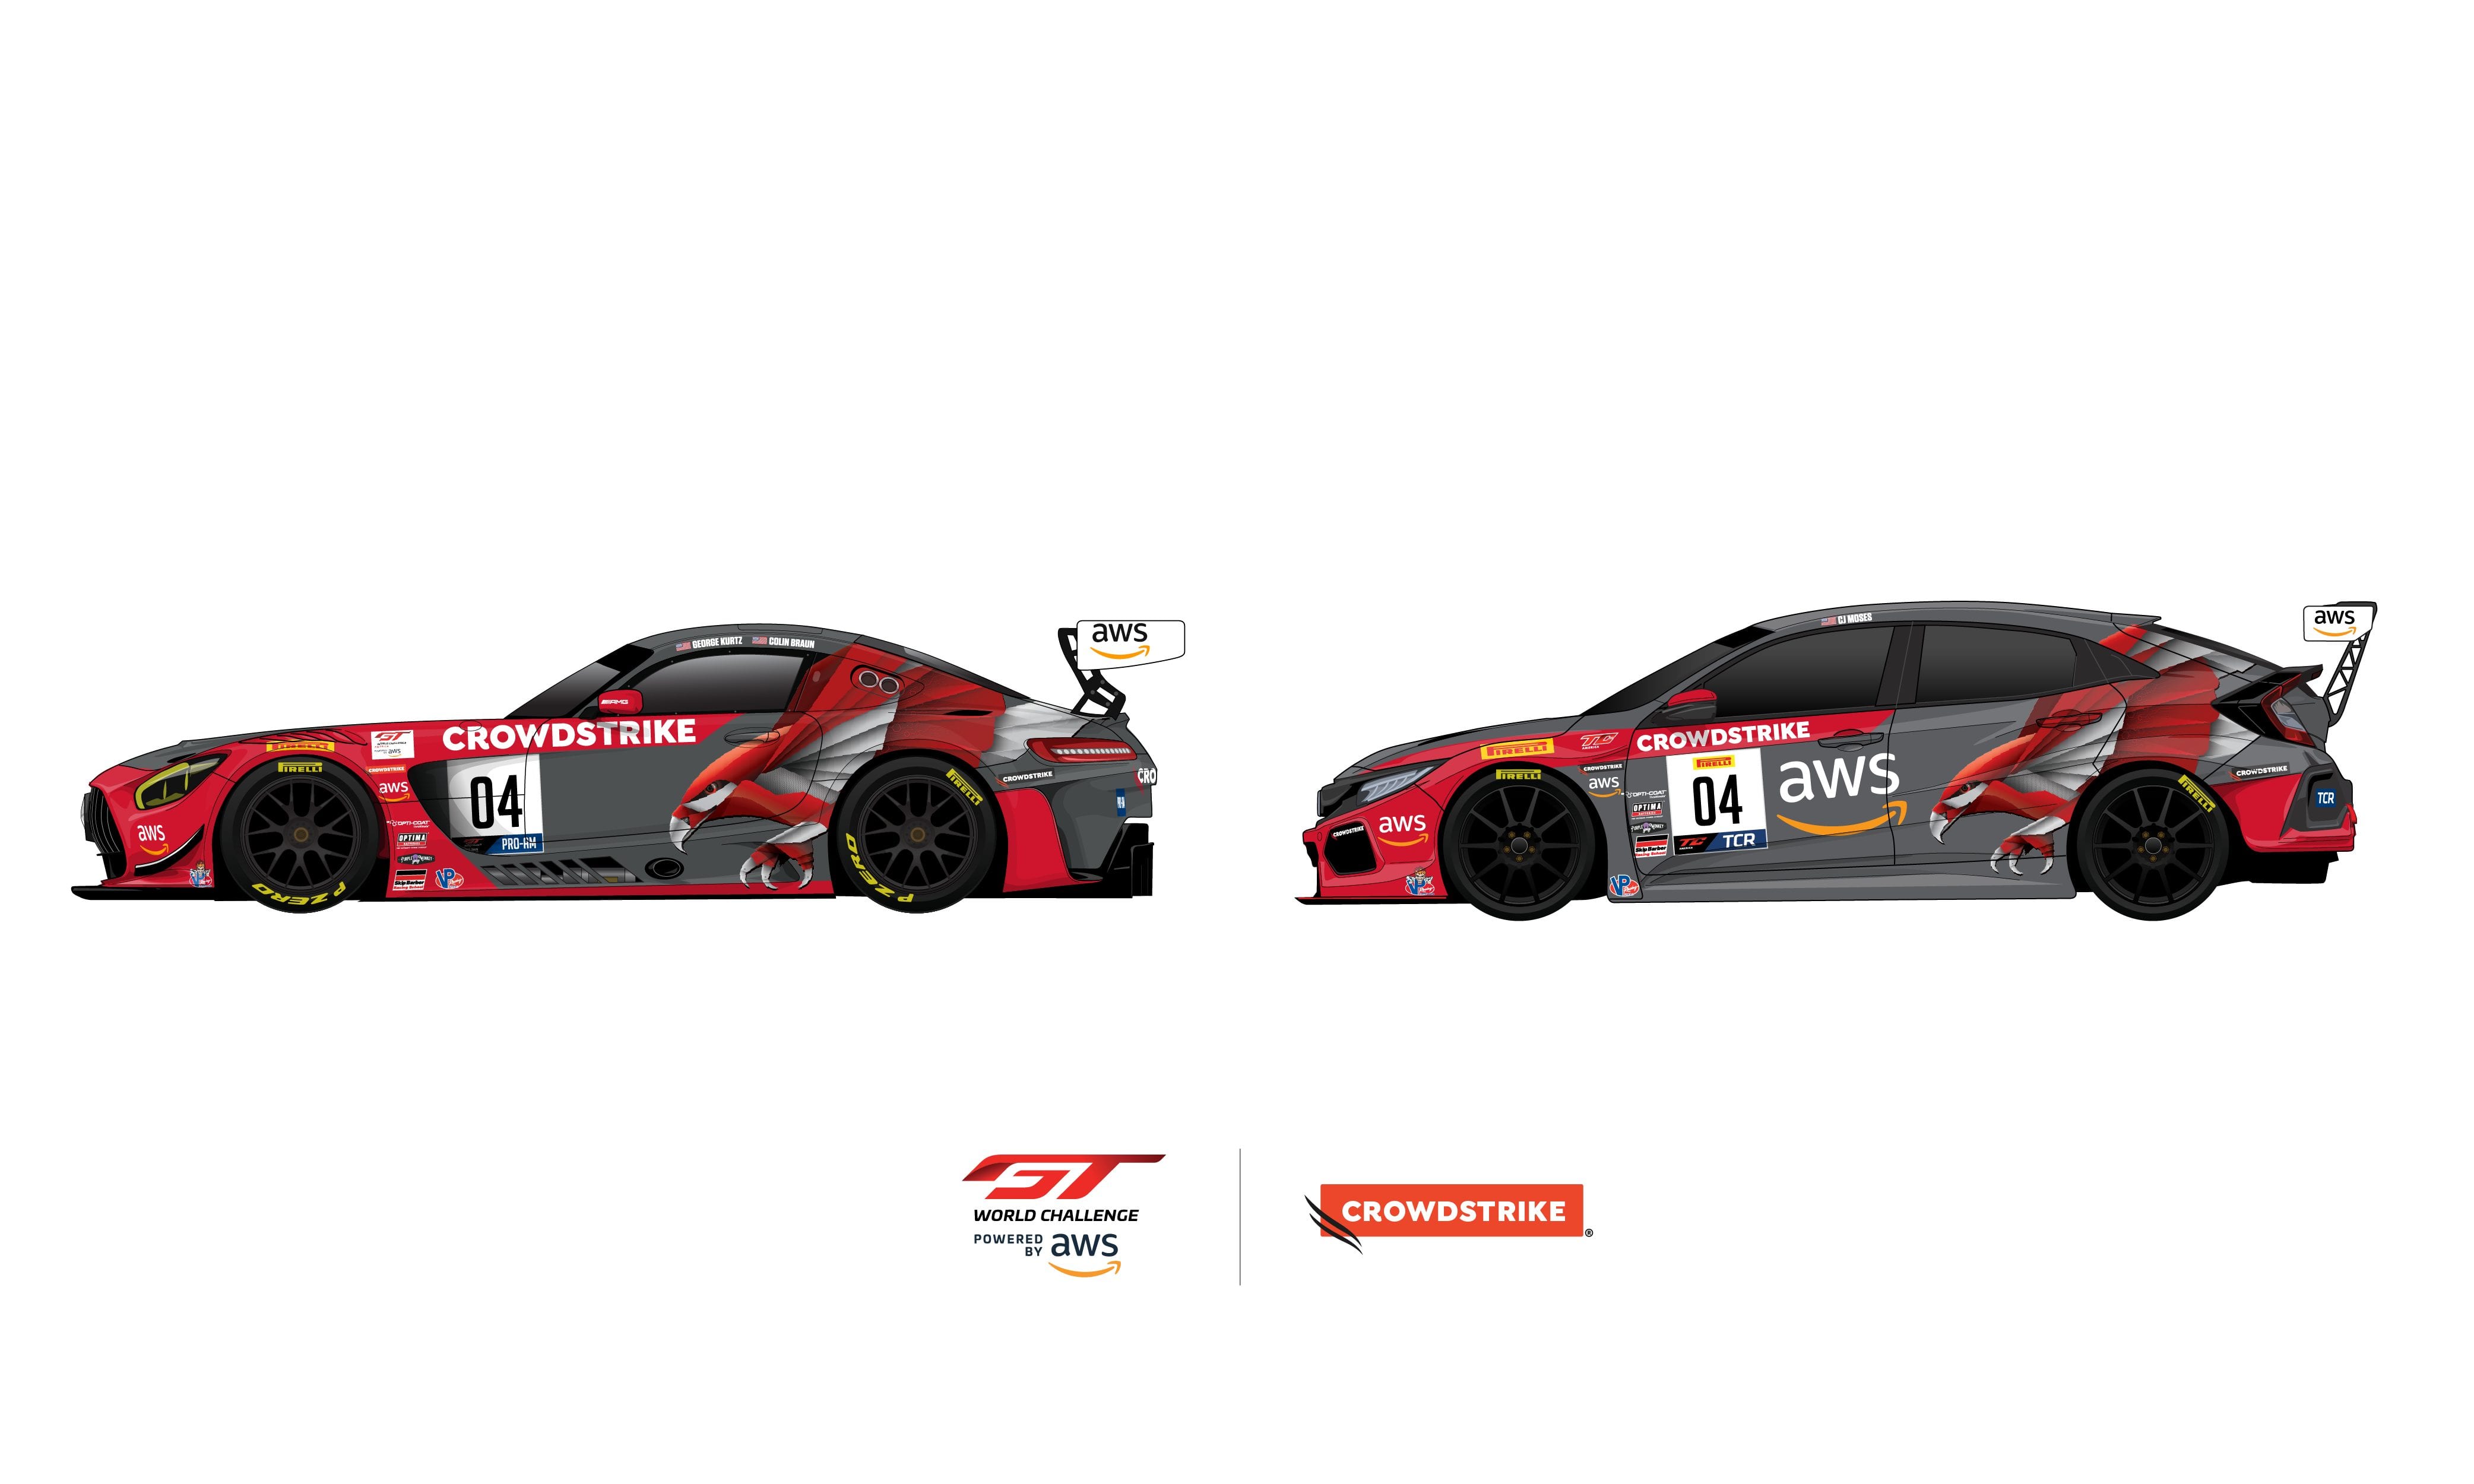 CrowdStrike Racing is expand its sports car racing program for 2020.